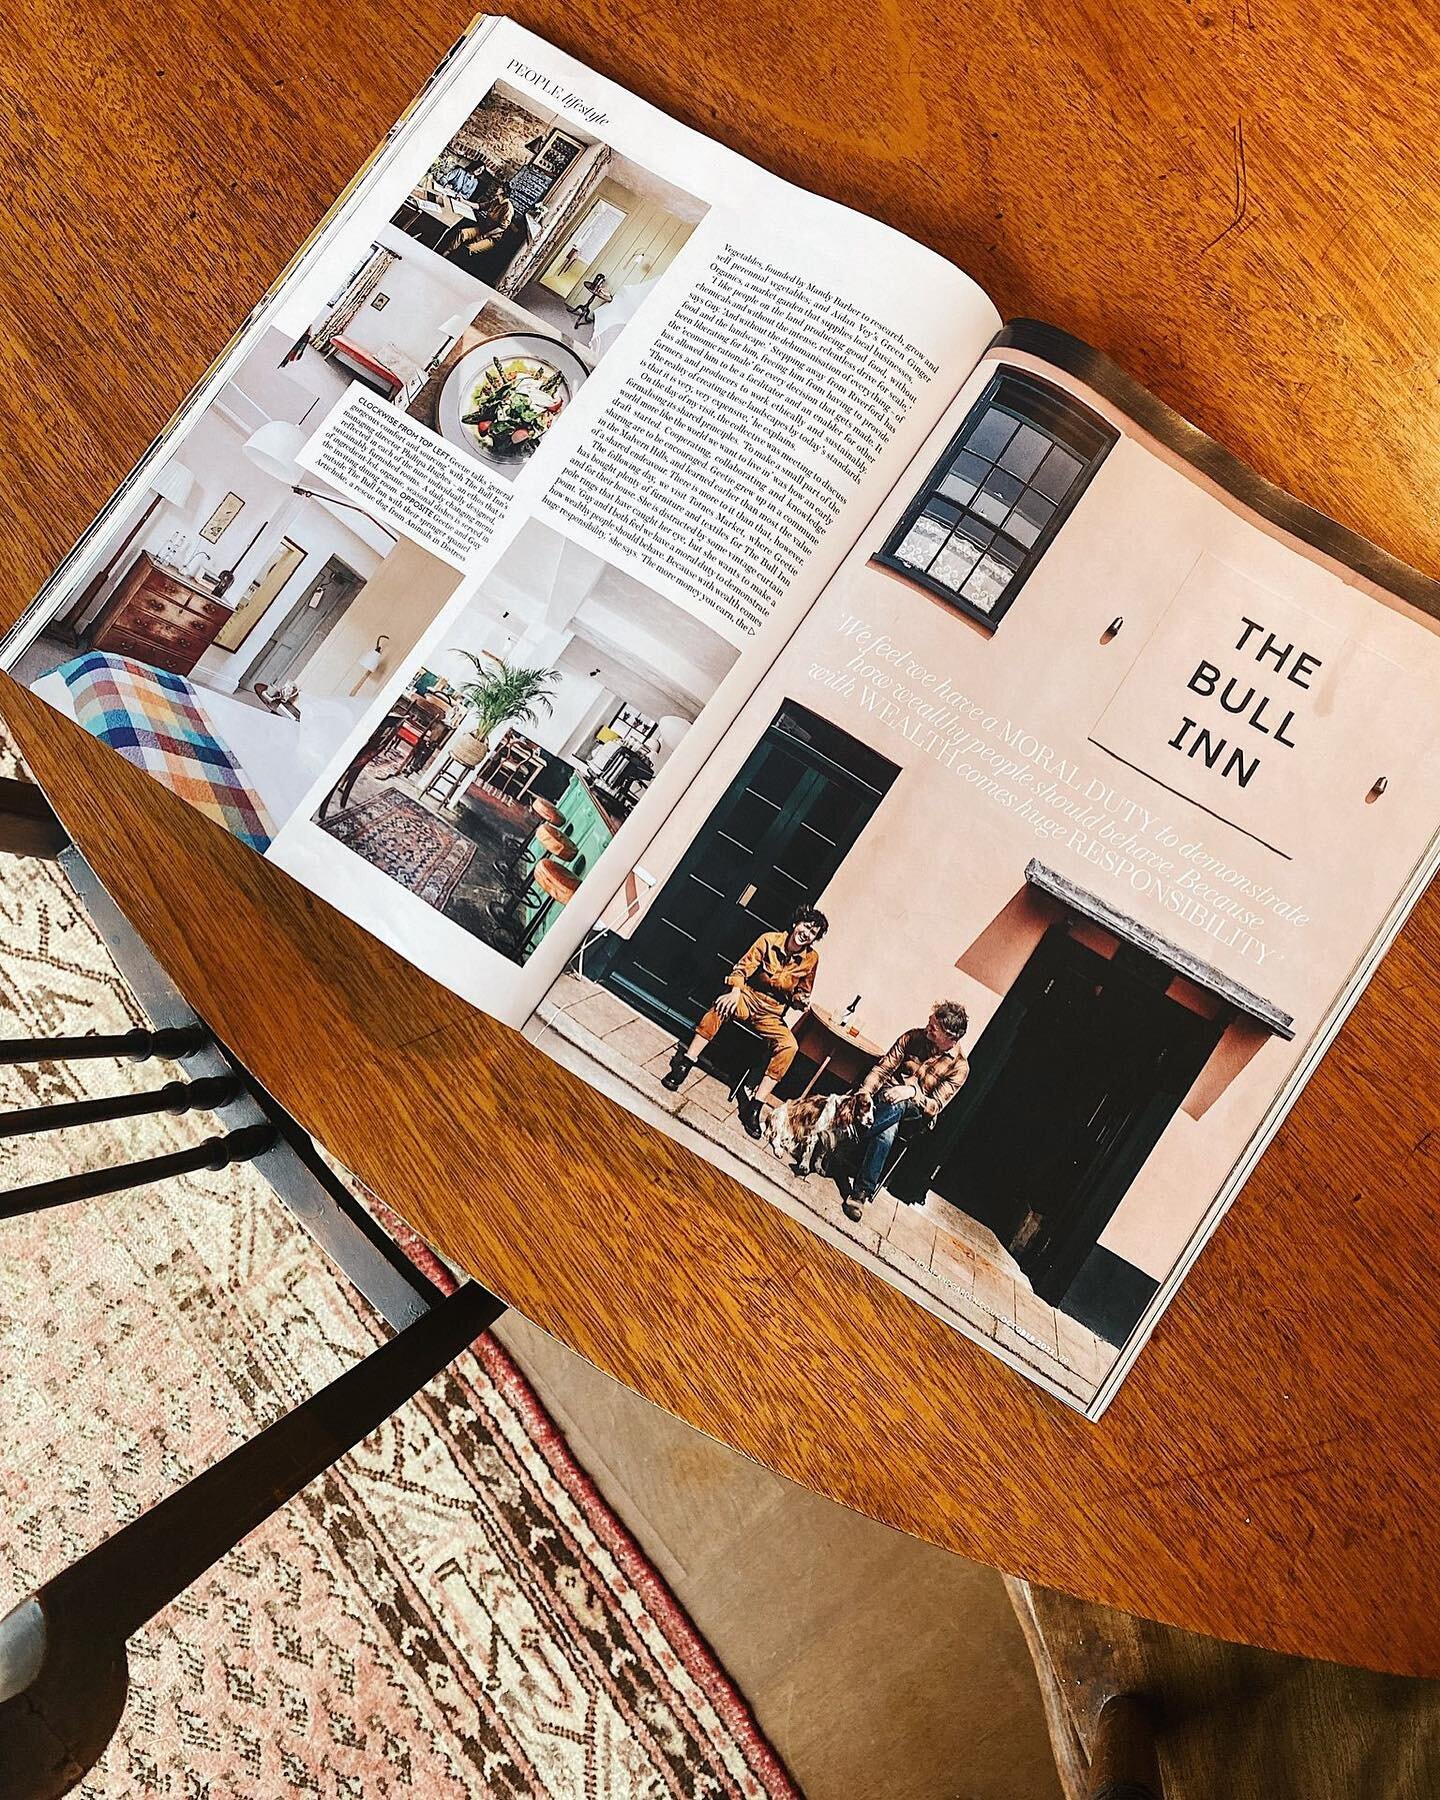 So little old Baddaford Collective got it&rsquo;s first mention in one of the big &lsquo;zines. 
We were lucky enough to have @houseandgardenuk visit Baddaford Farm to talk veg, social responsibility and what it is like living, farming and doing busi